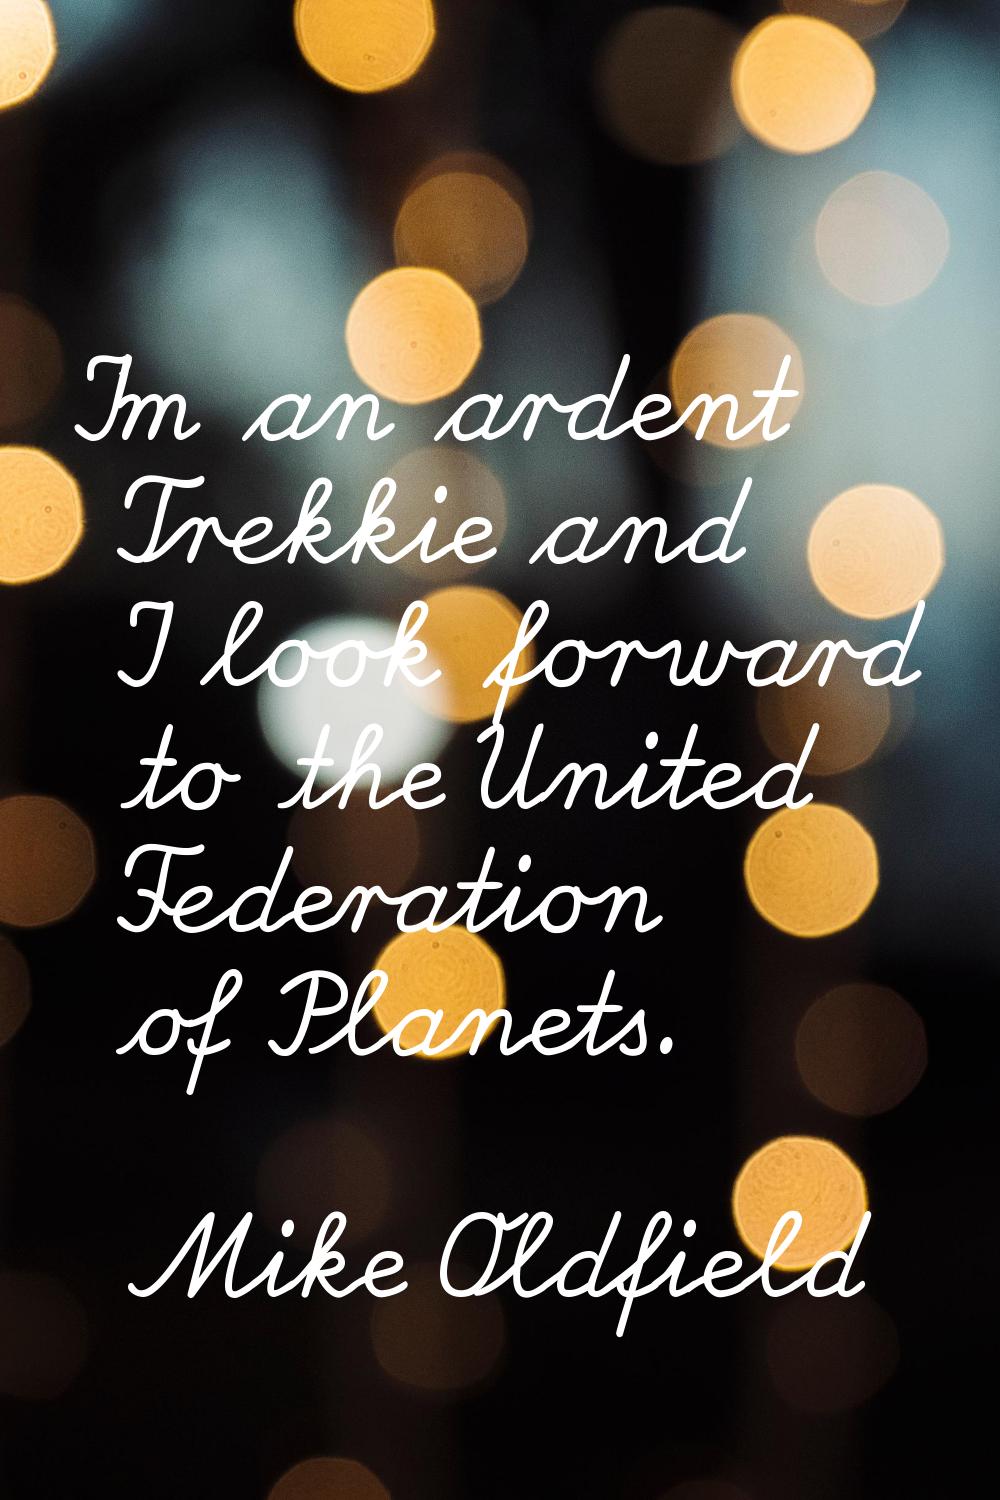 I'm an ardent Trekkie and I look forward to the United Federation of Planets.